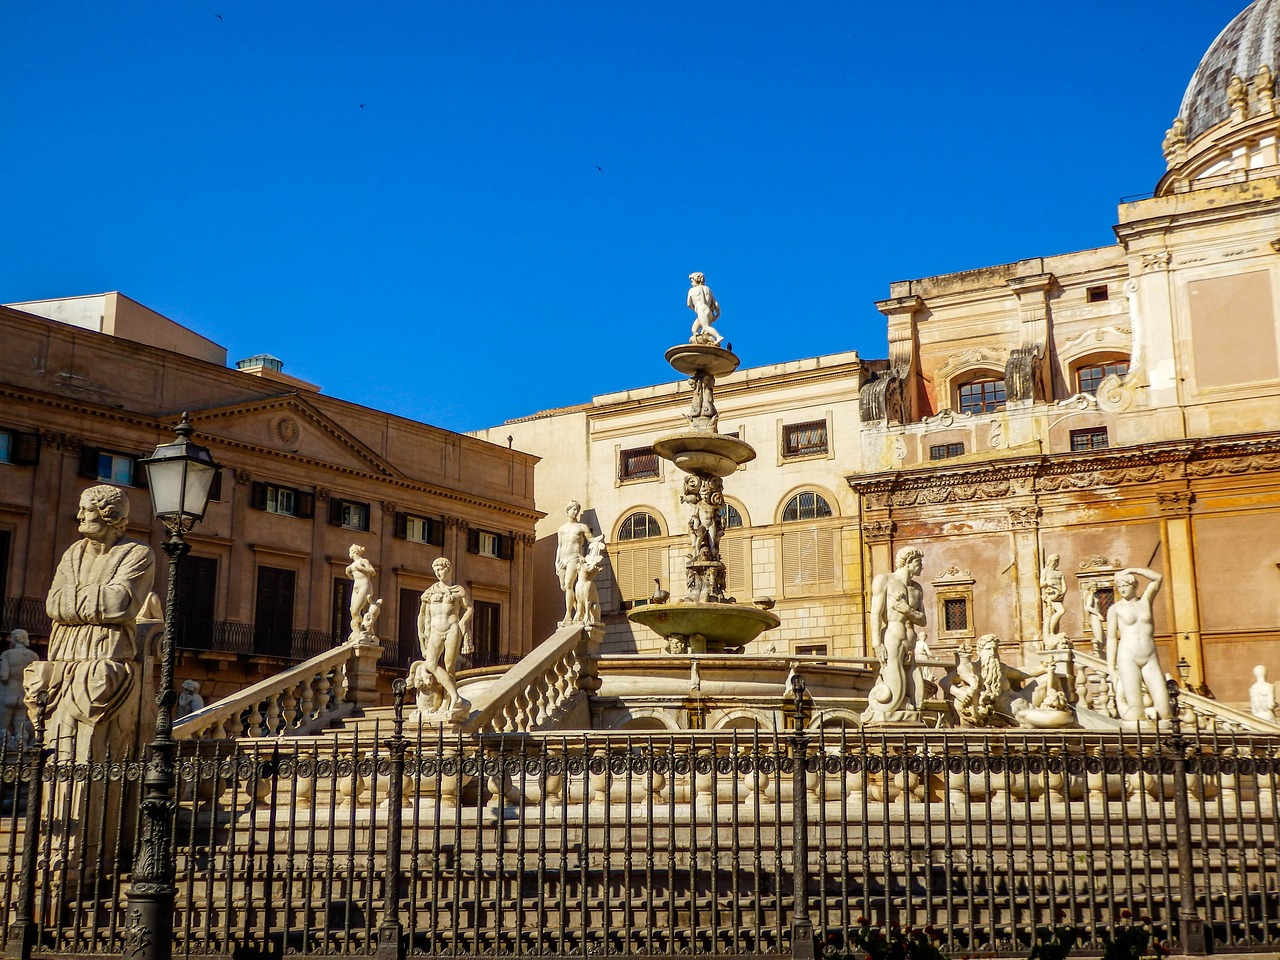 4-Day Adventure in Palermo, Italy